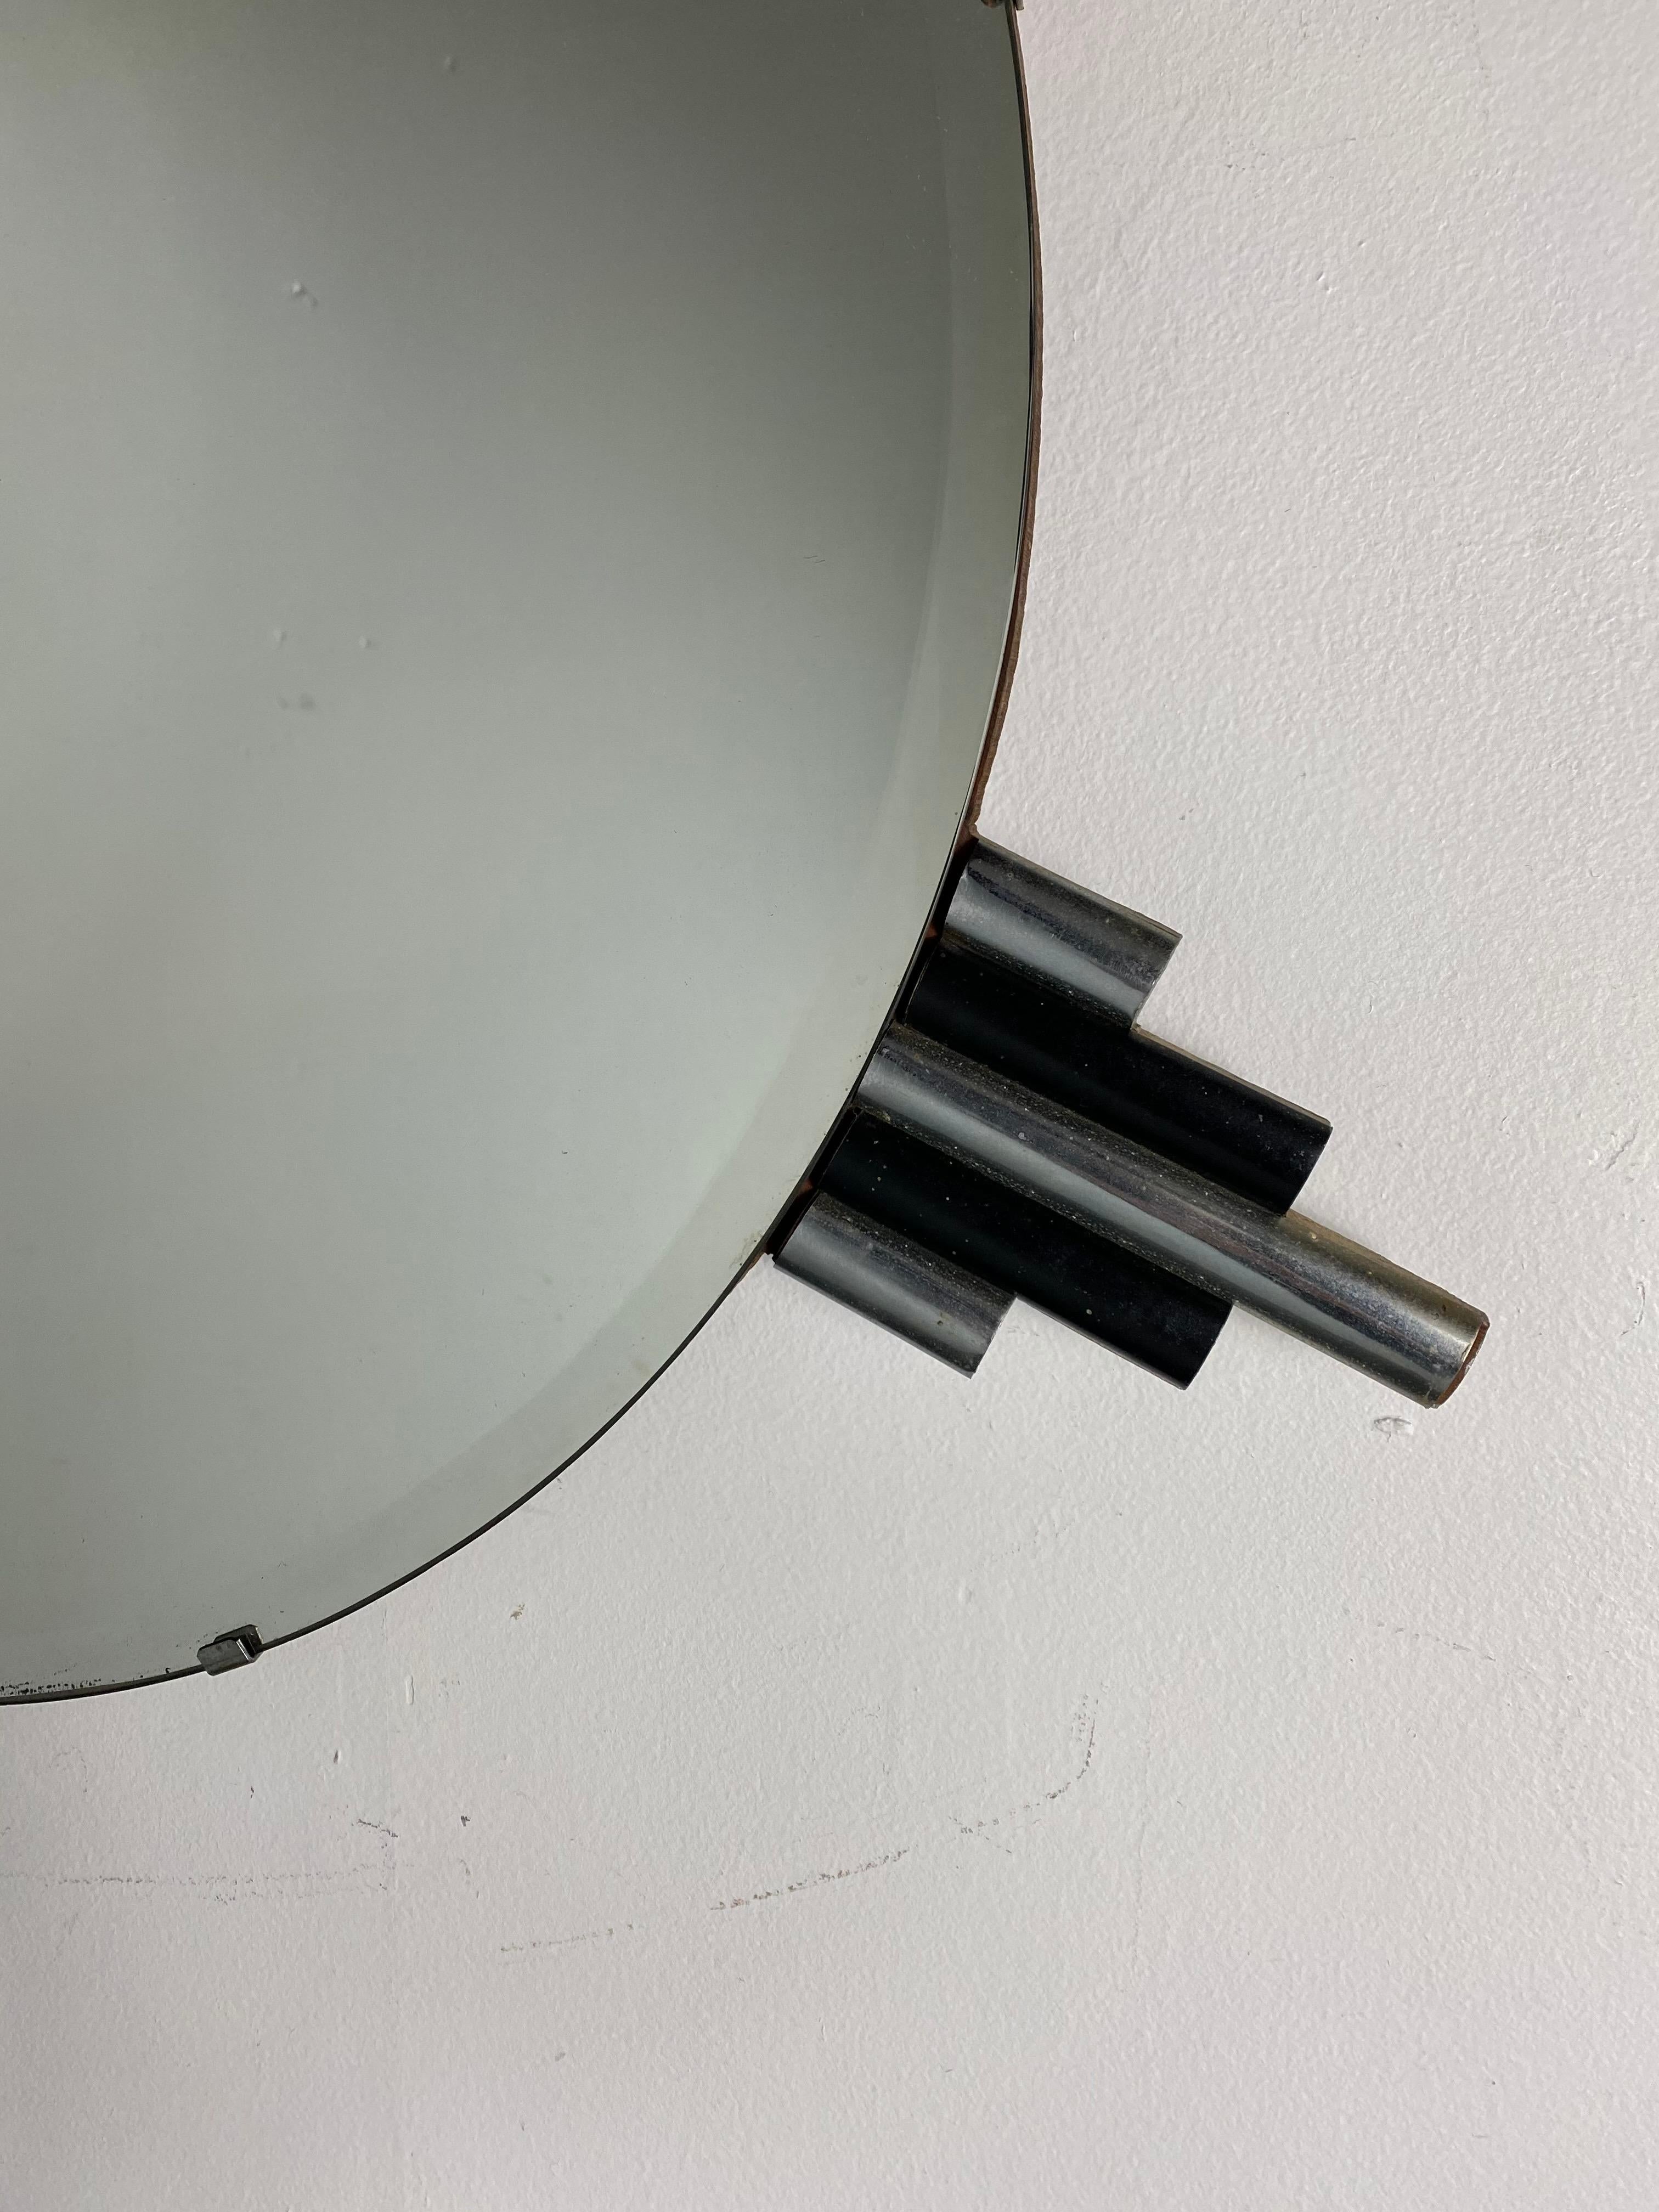 Unusual Art Deco Wall Mirror with Black and Chrome Sky-Scraper Sides In Good Condition For Sale In Buffalo, NY